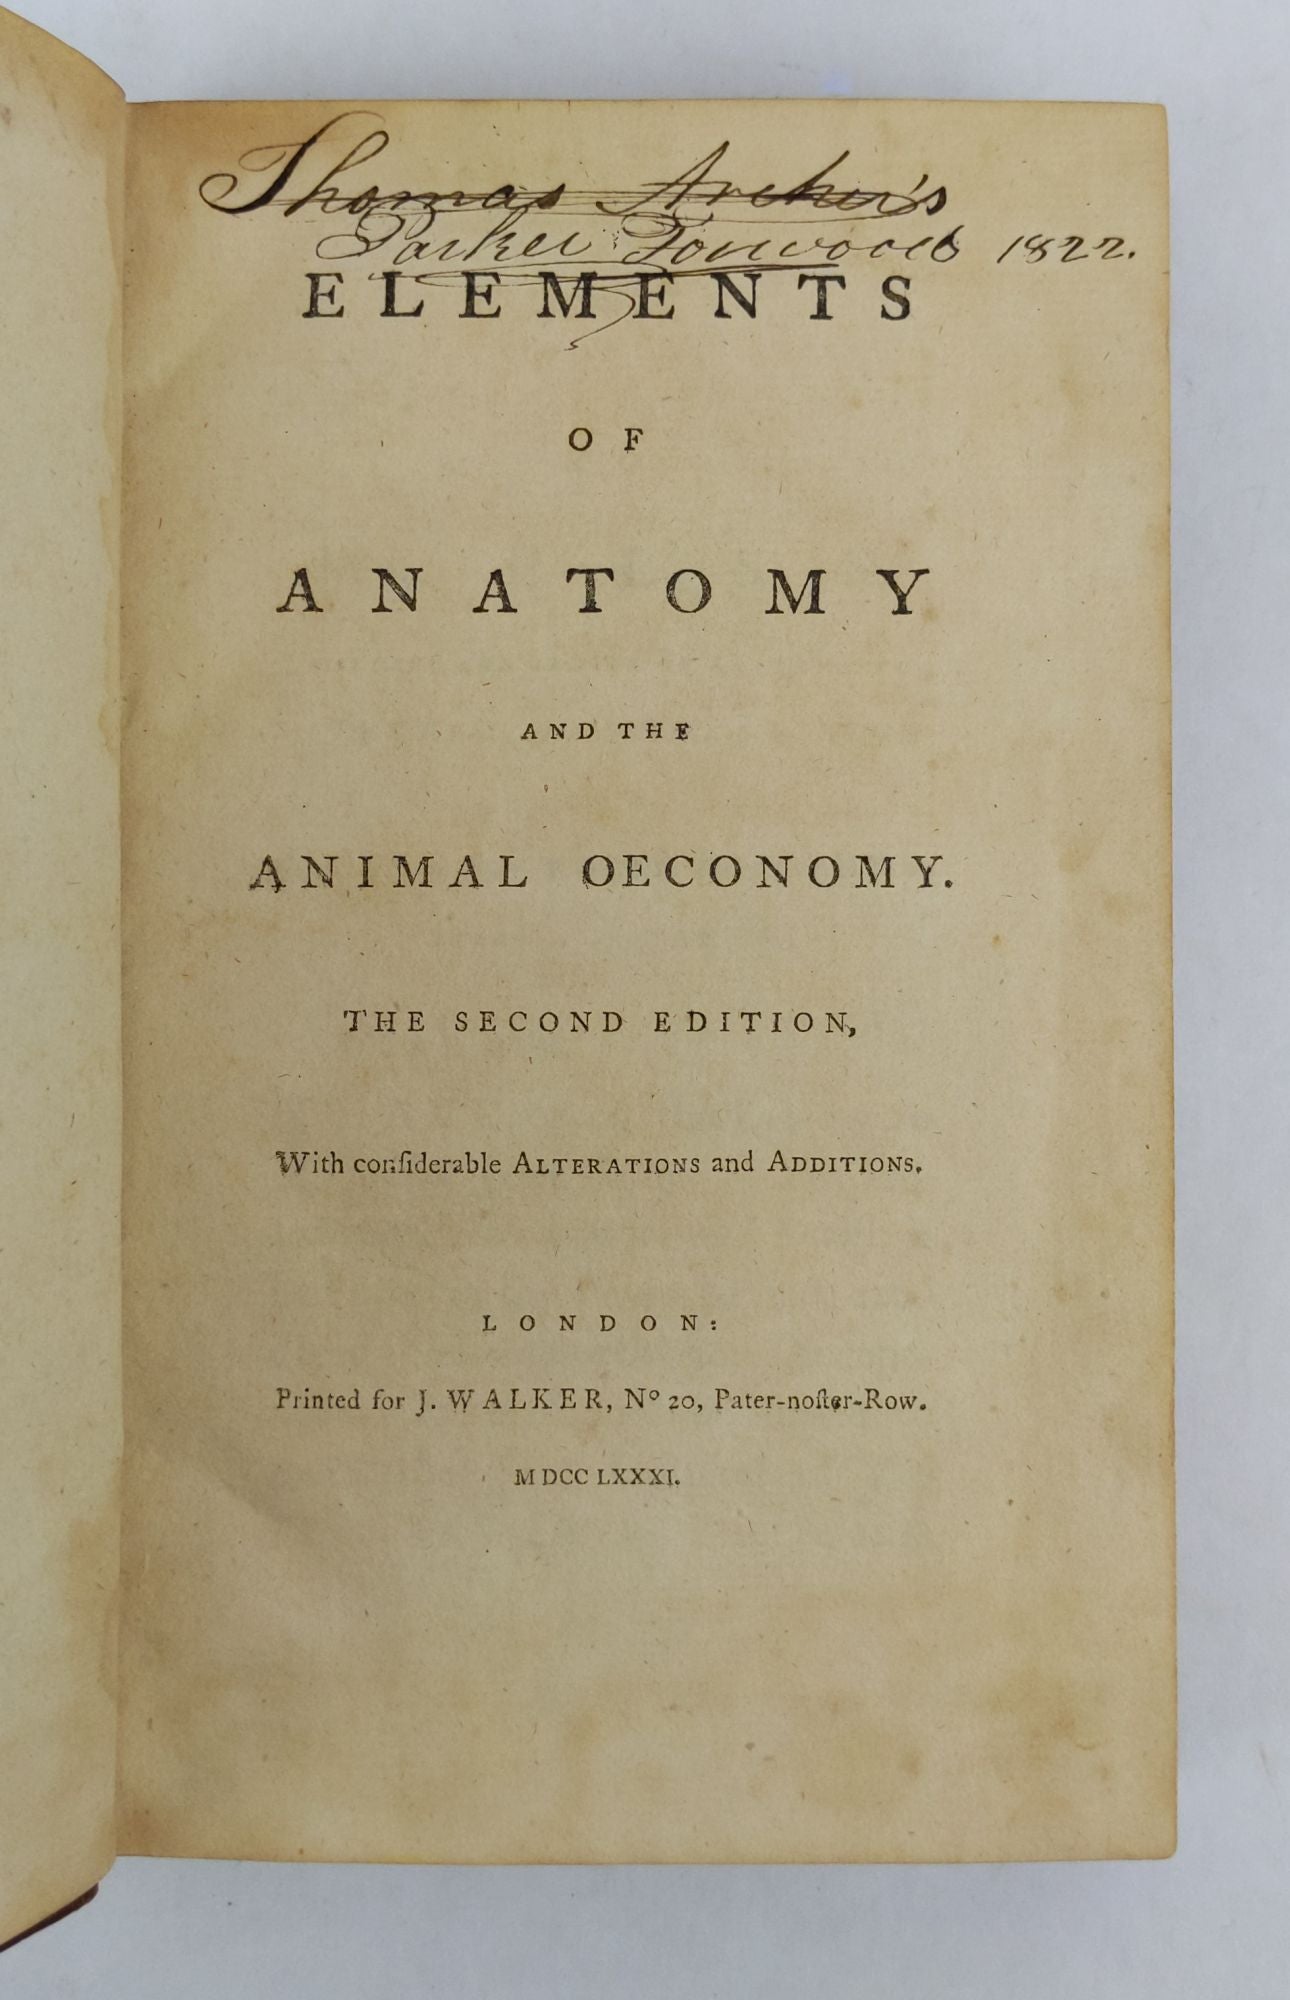 Product Image for ELEMENTS OF ANATOMY AND THE ANIMAL OECONOMY